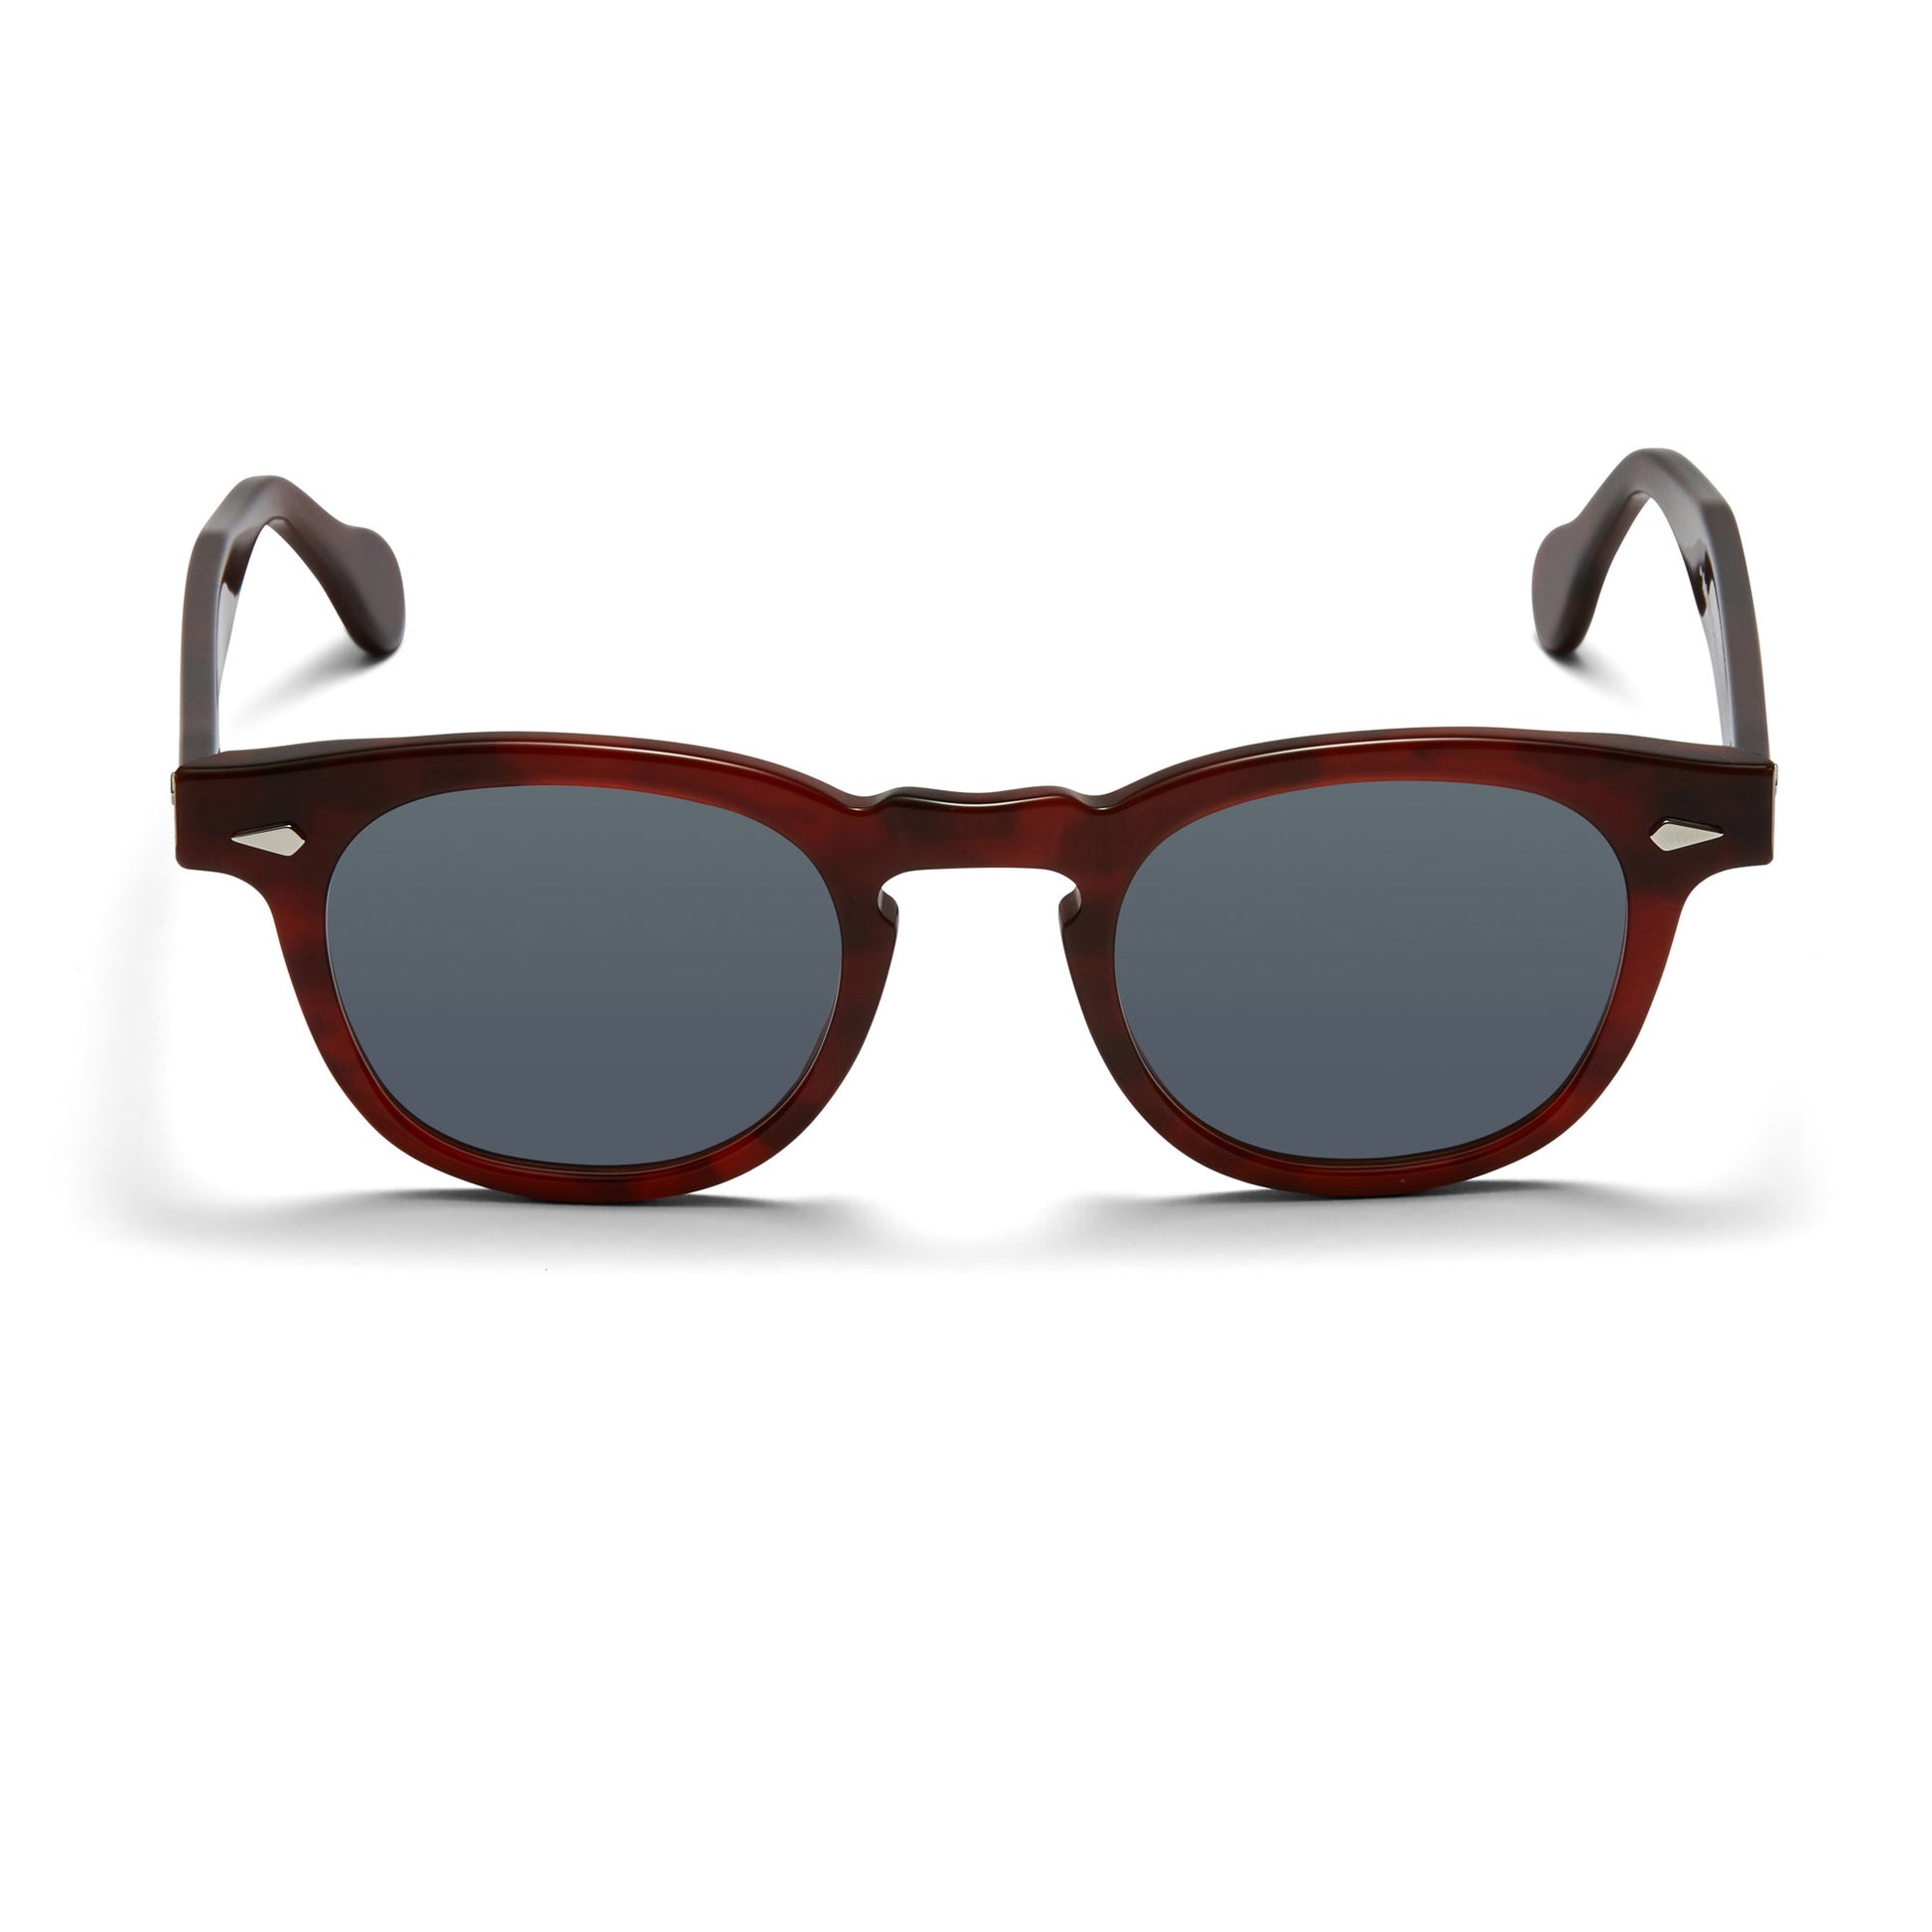 A front view of the burgundy Arnel USA sunglass frame—the Vintage eyewear. 